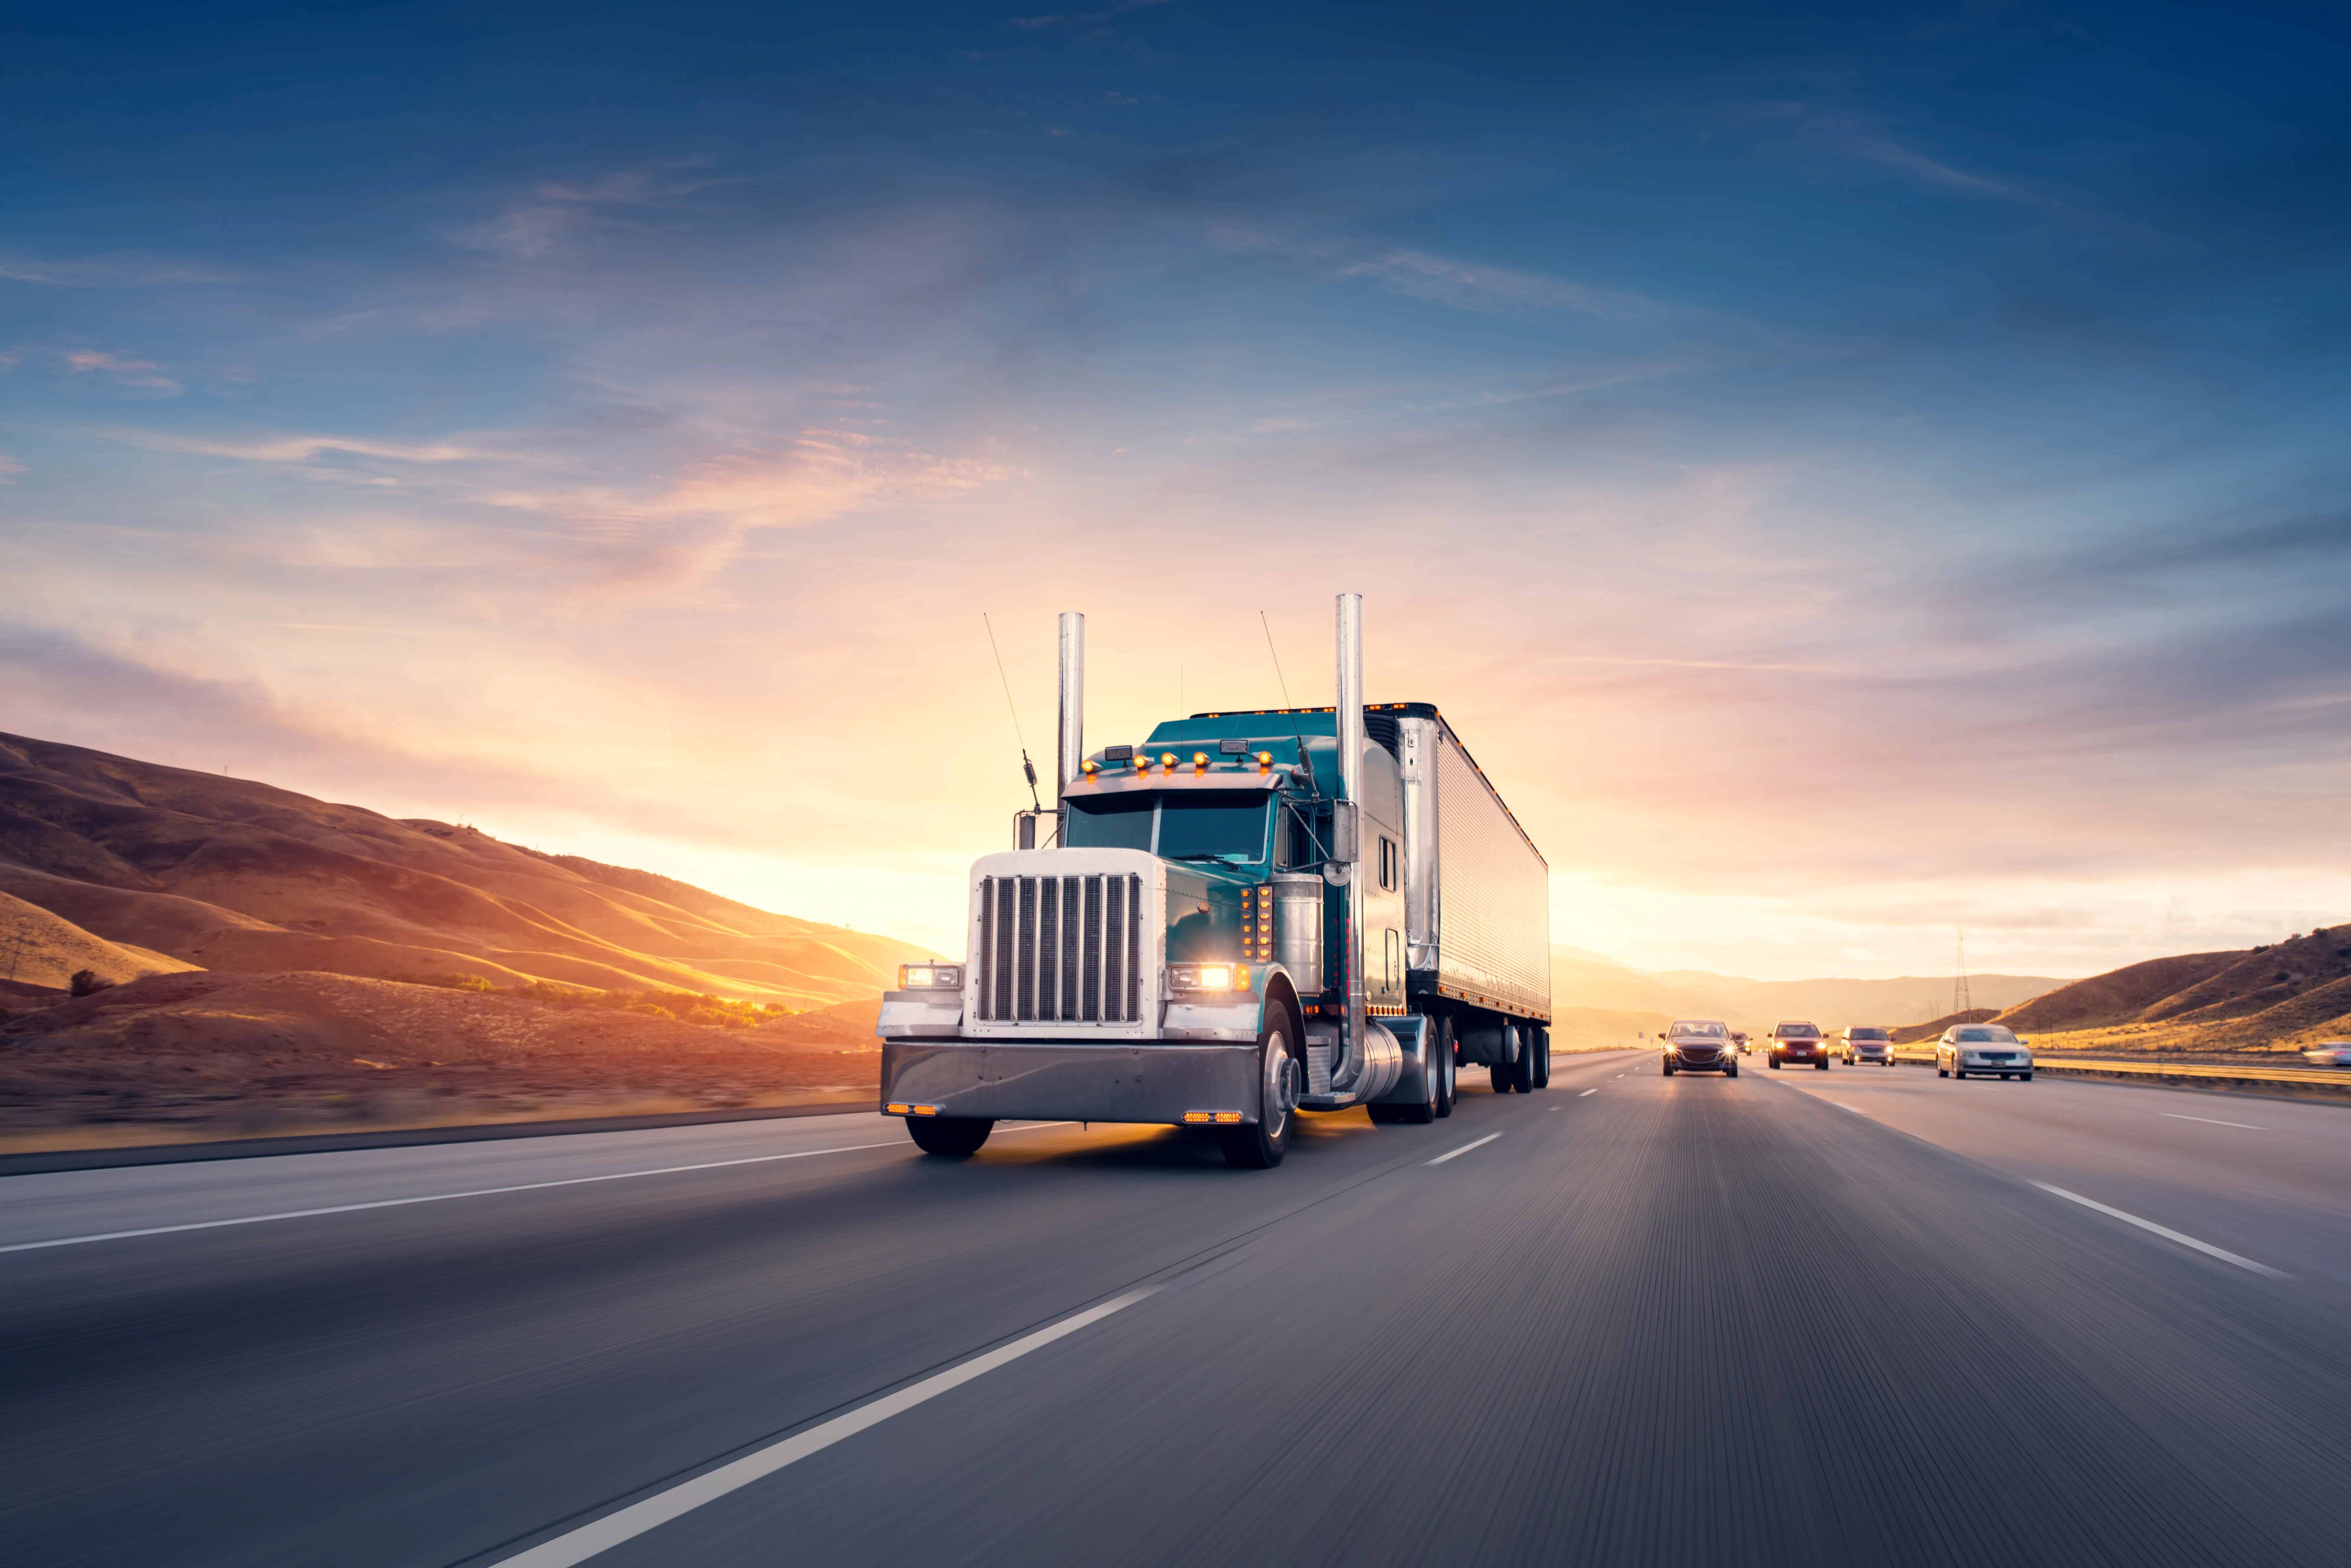 Truck Driving Jobs: Opportunities and Requirements